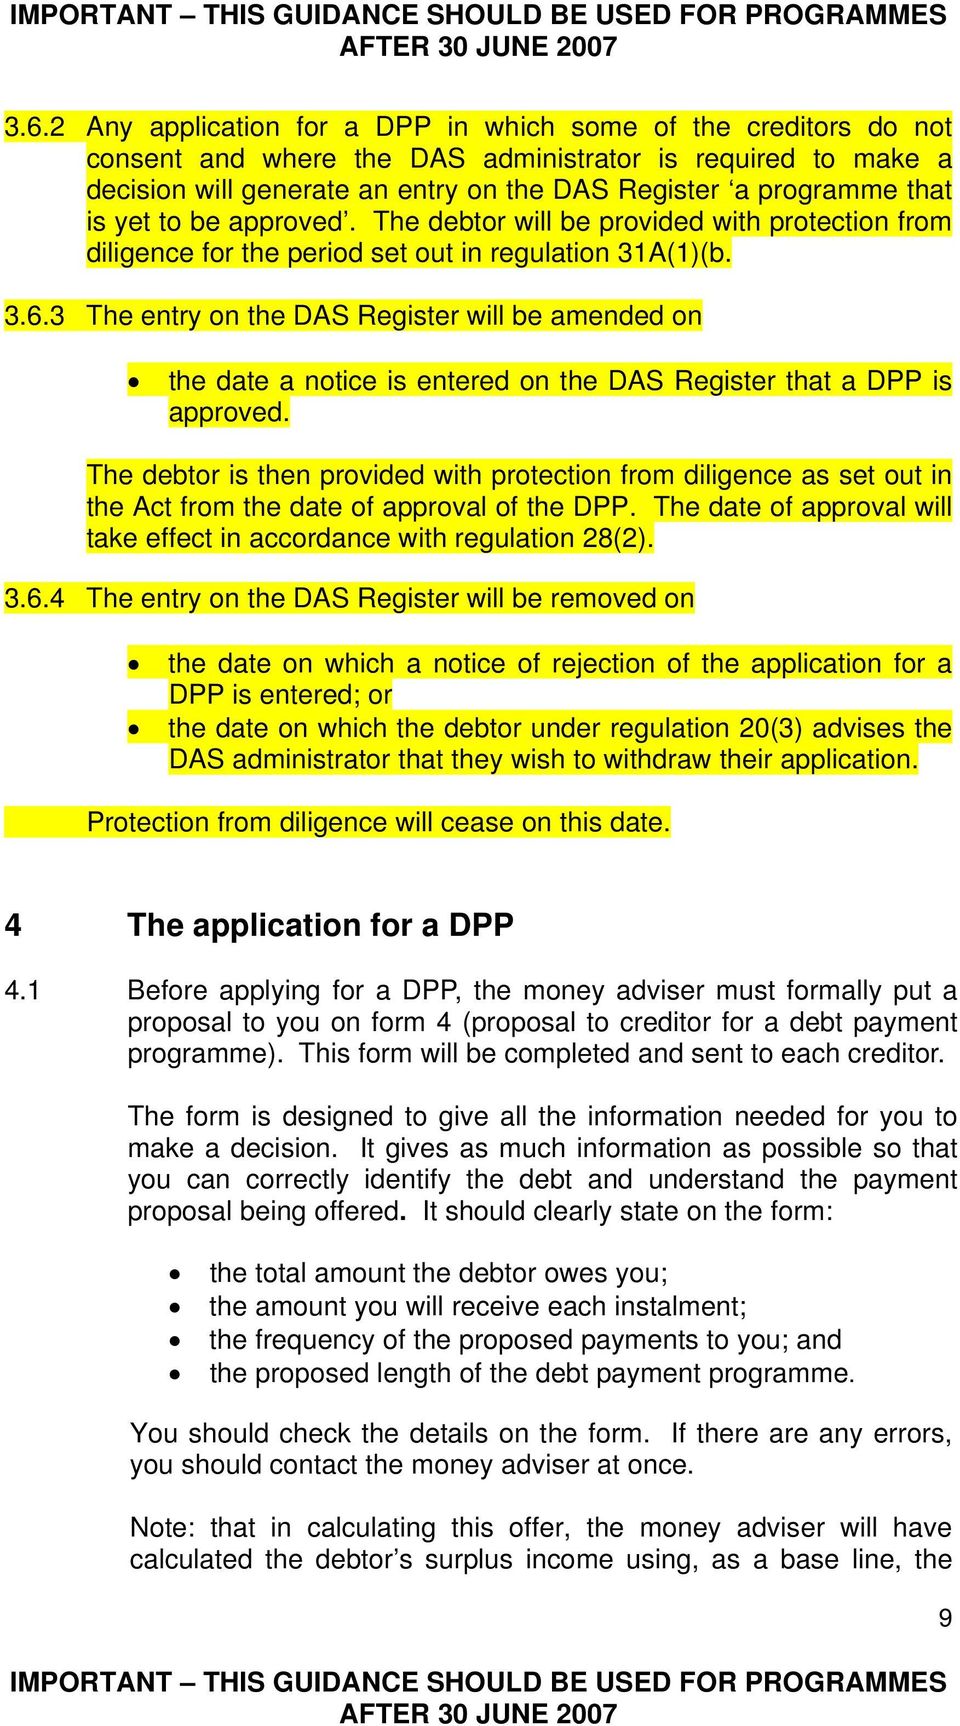 3 The entry on the DAS Register will be amended on the date a notice is entered on the DAS Register that a DPP is approved.